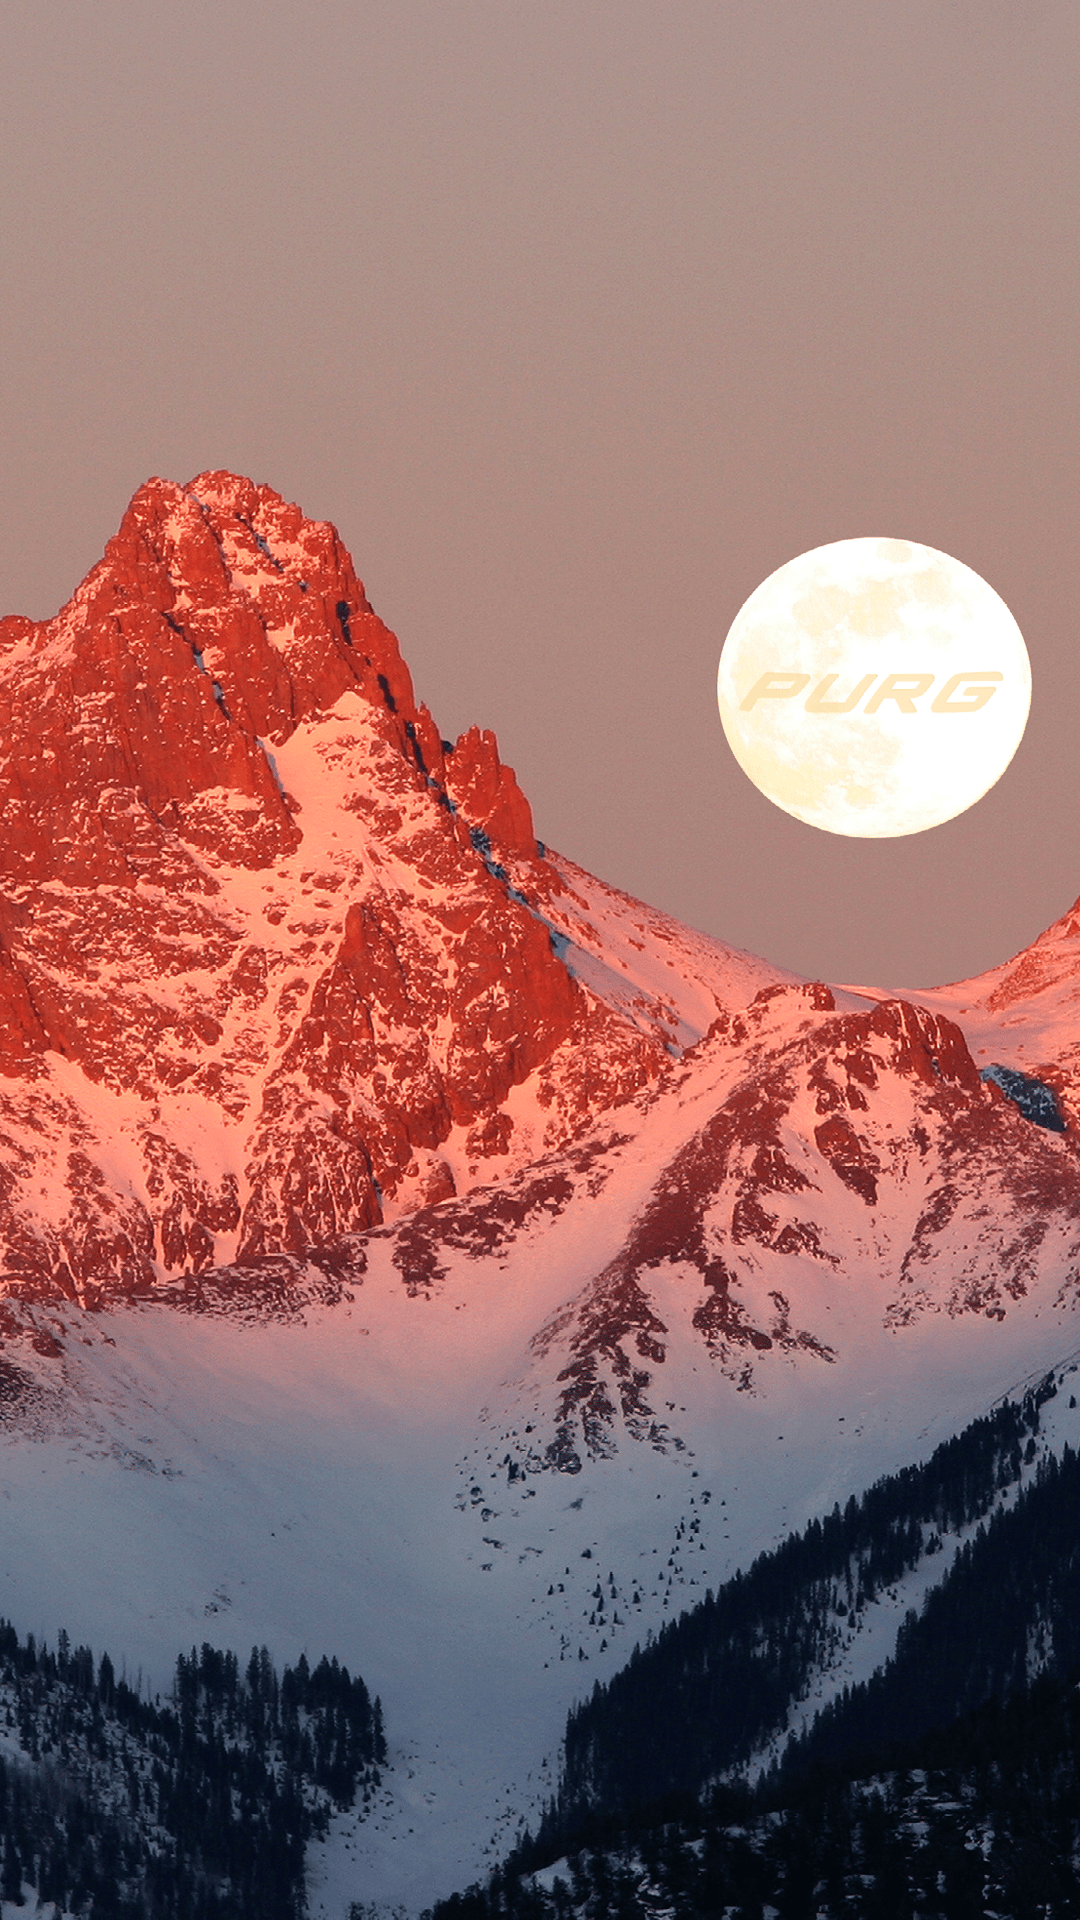 The moon rises between two snowy peaks in a scenic phone background